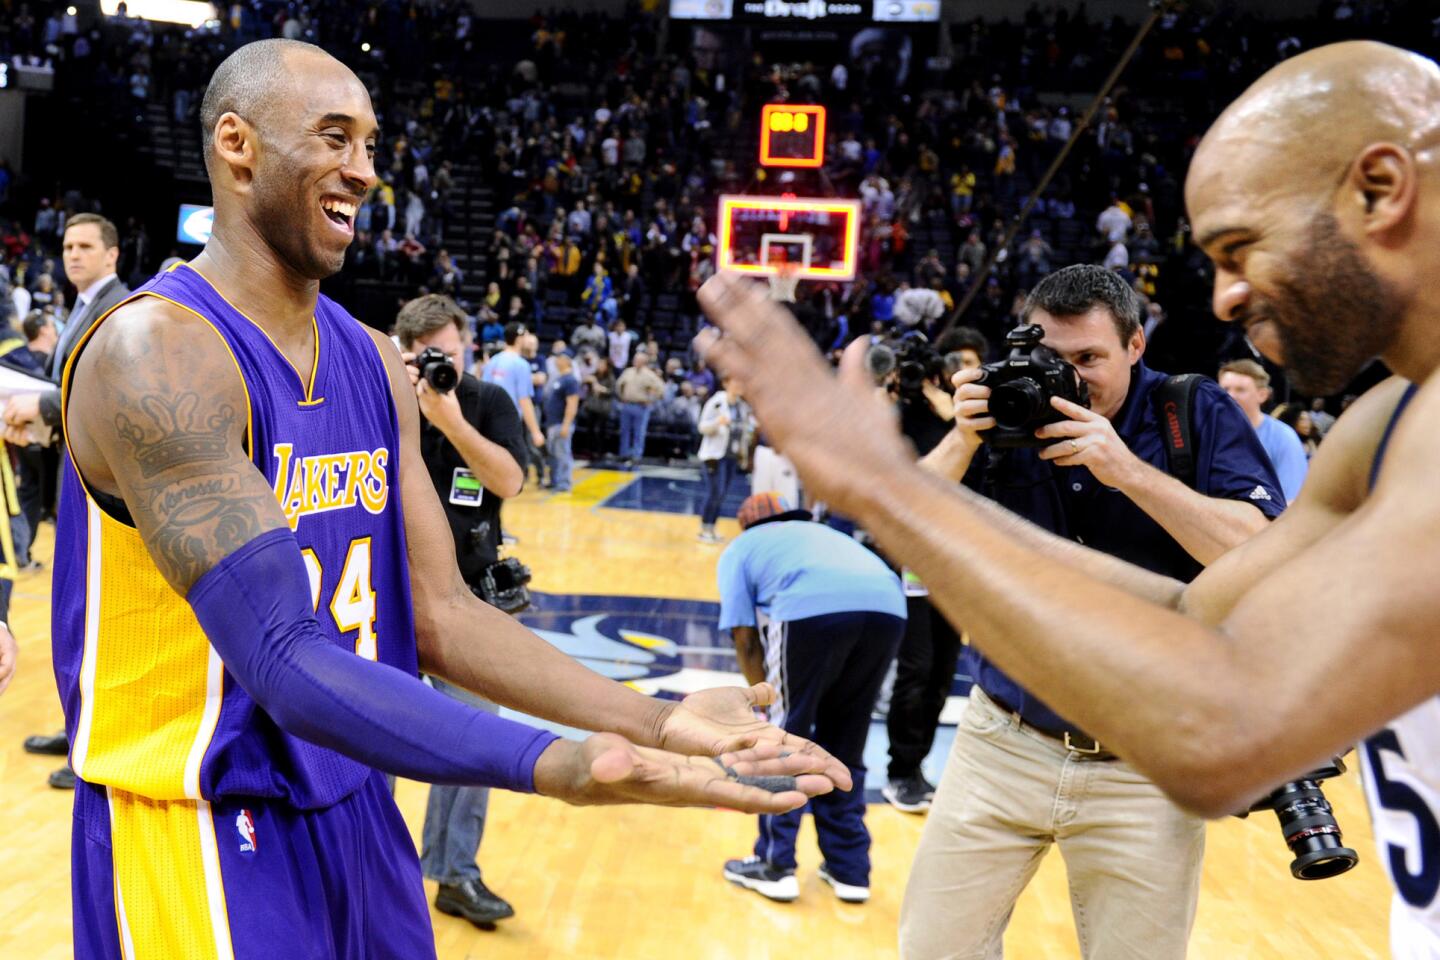 Lakers star Kobe Bryant and Grizzlies forward Vince Carter greet each other after a game in Memphis, Tenn., on Feb. 24, 2016.